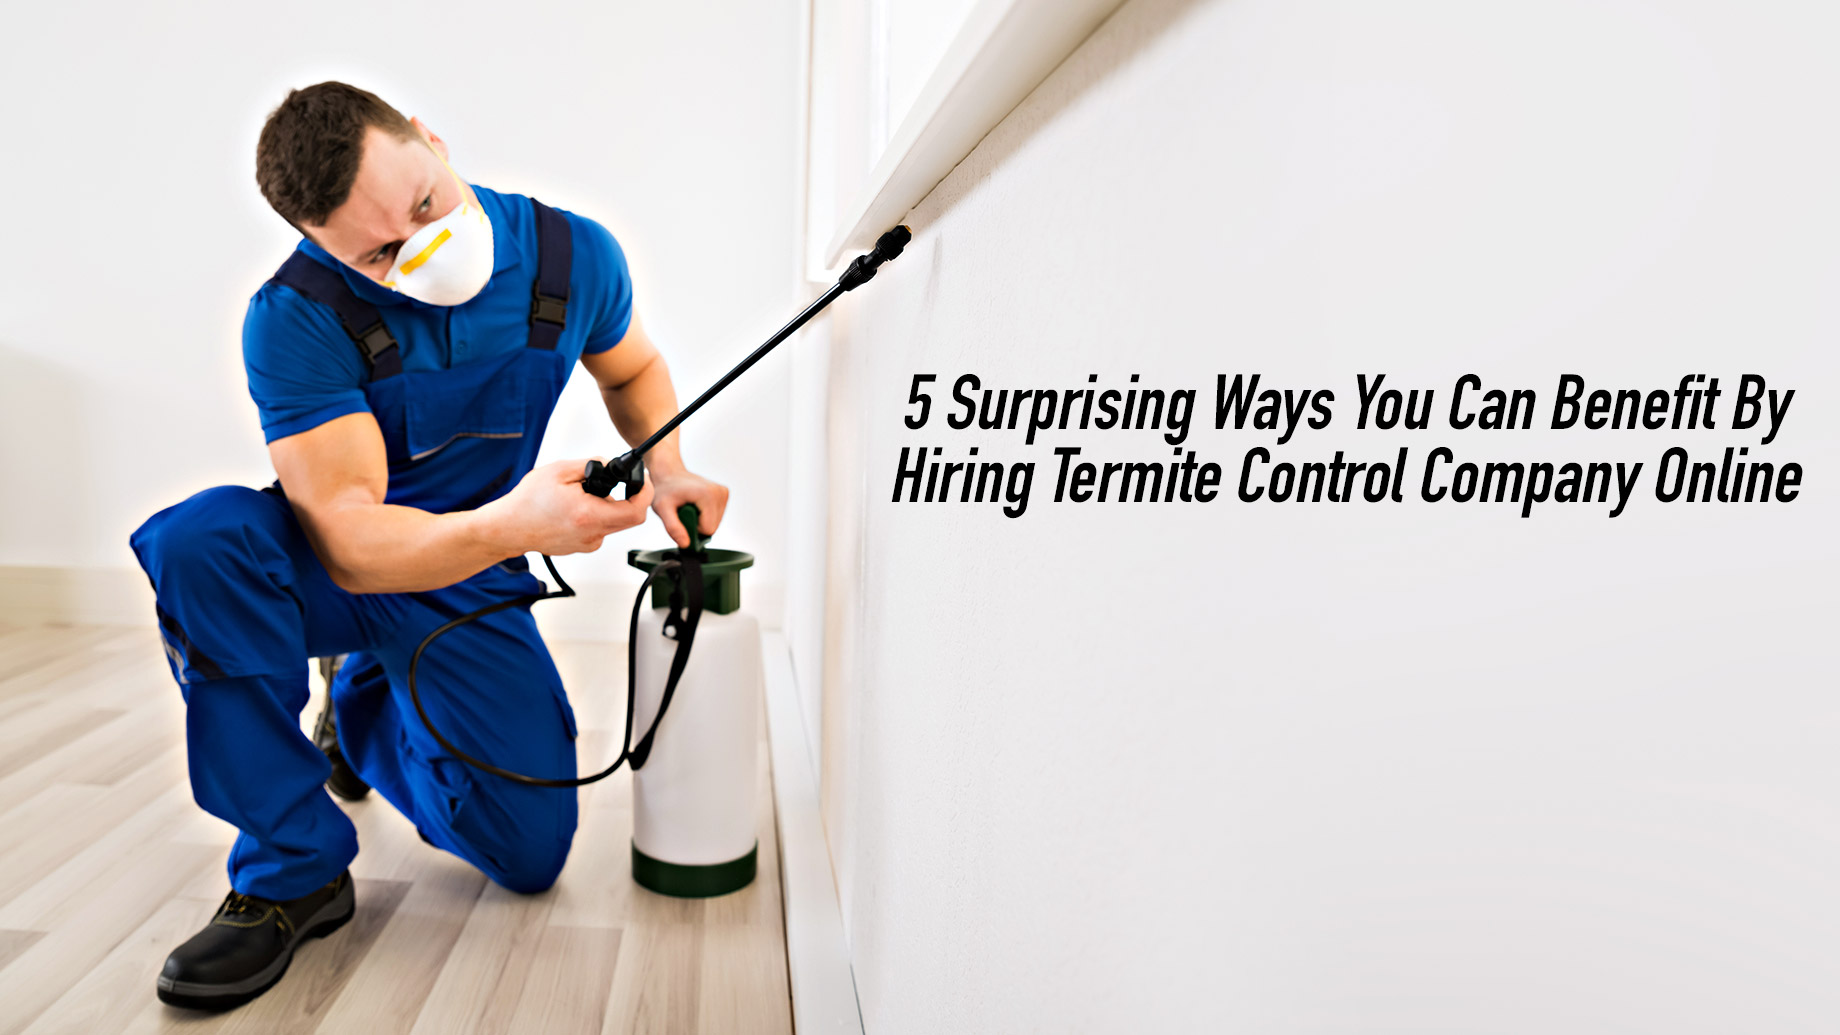 5 Surprising Ways You Can Benefit By Hiring A Termite Control Company Online